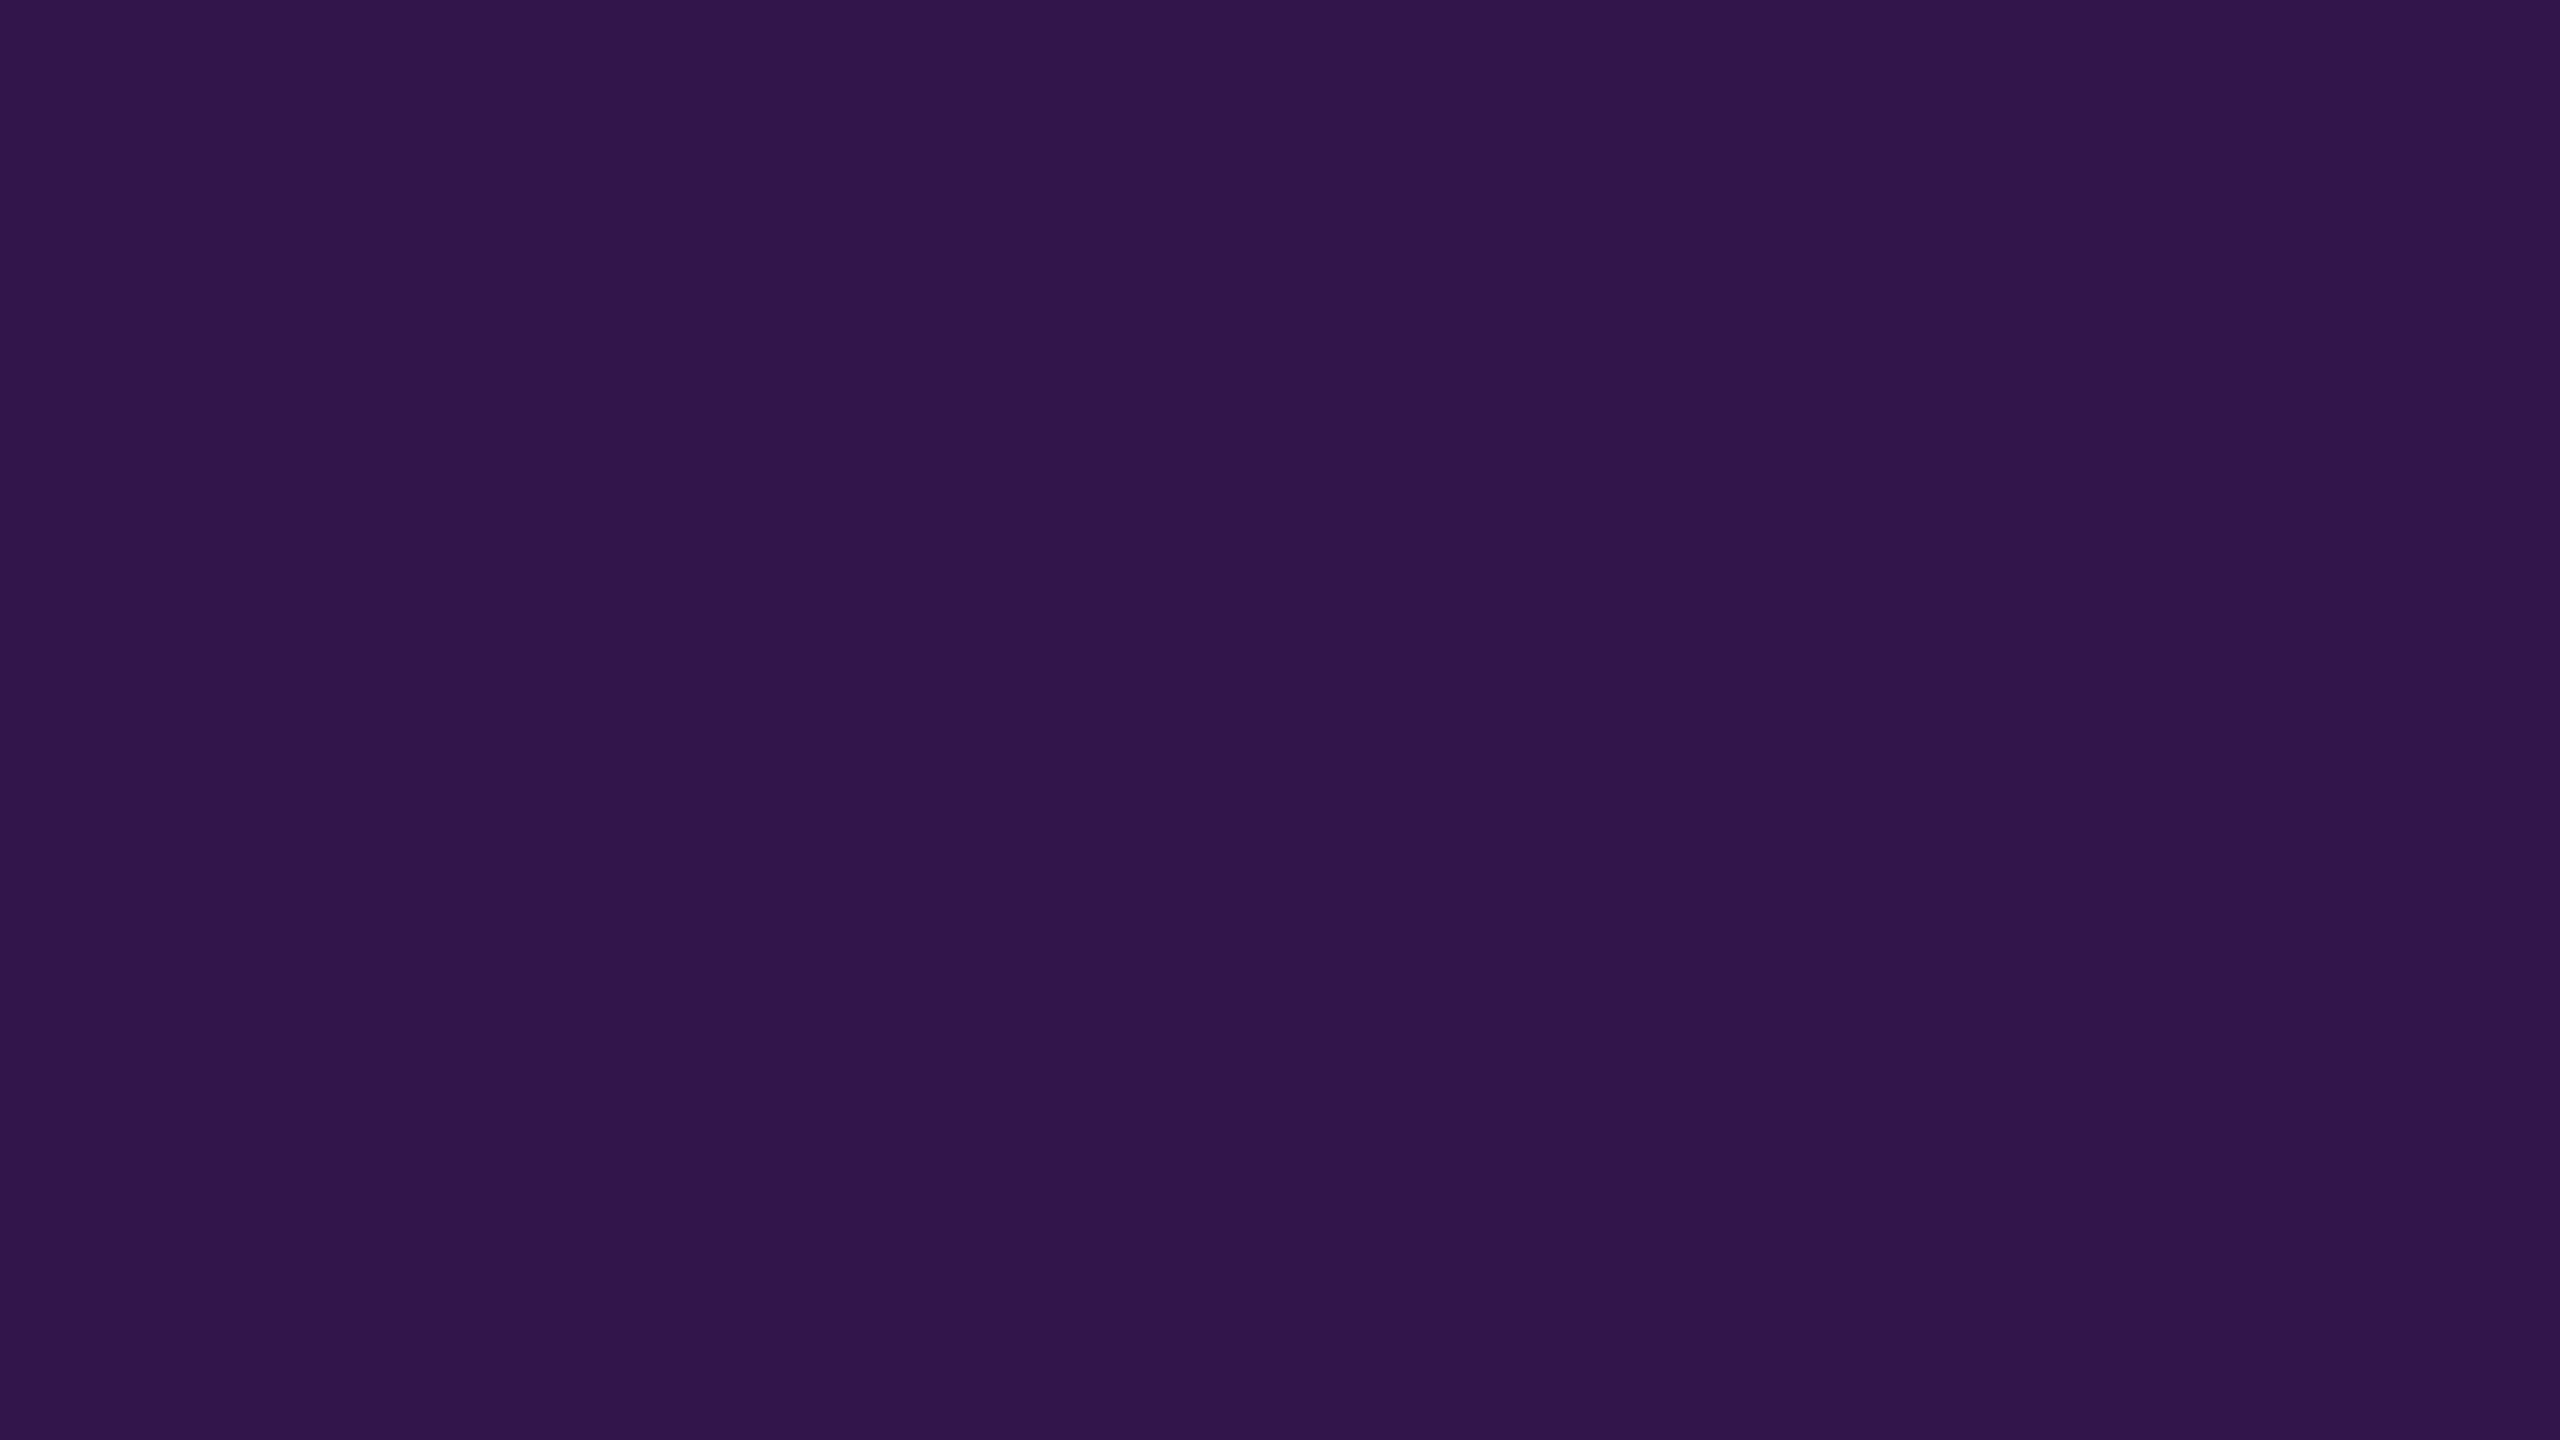 2560x1440 Russian Violet Solid Color Background